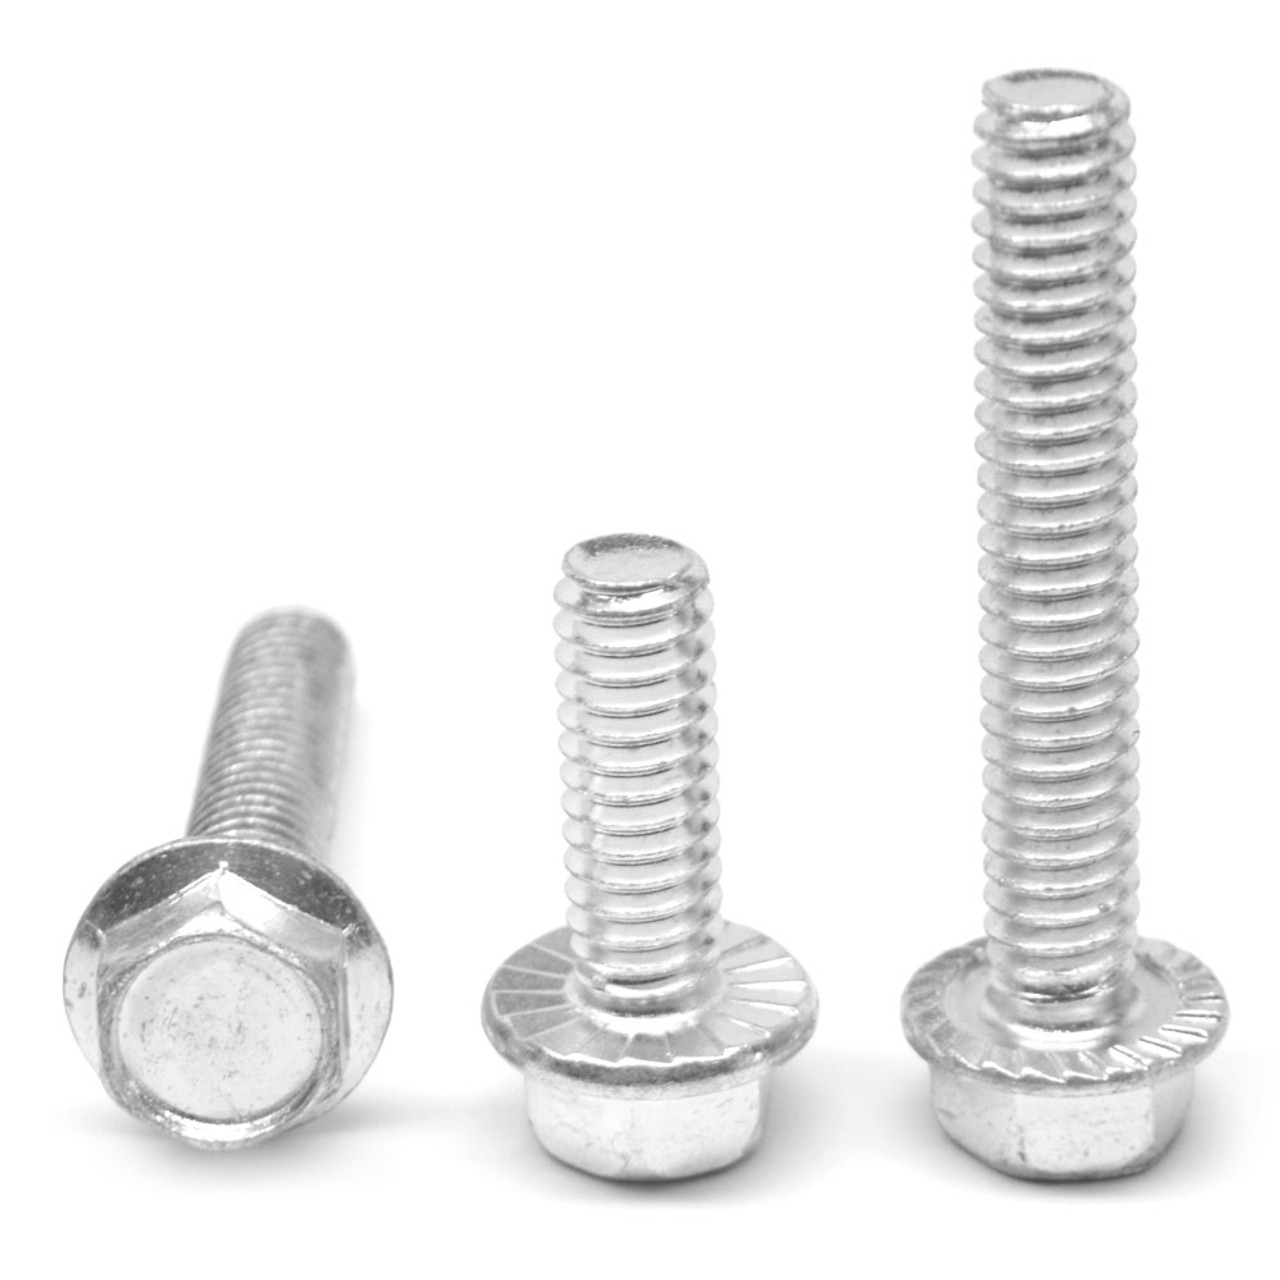 #10-32 x 3/4" (FT) Fine Thread Hex Flange Screw with Serration Case Hardened Low Carbon Steel Zinc Plated